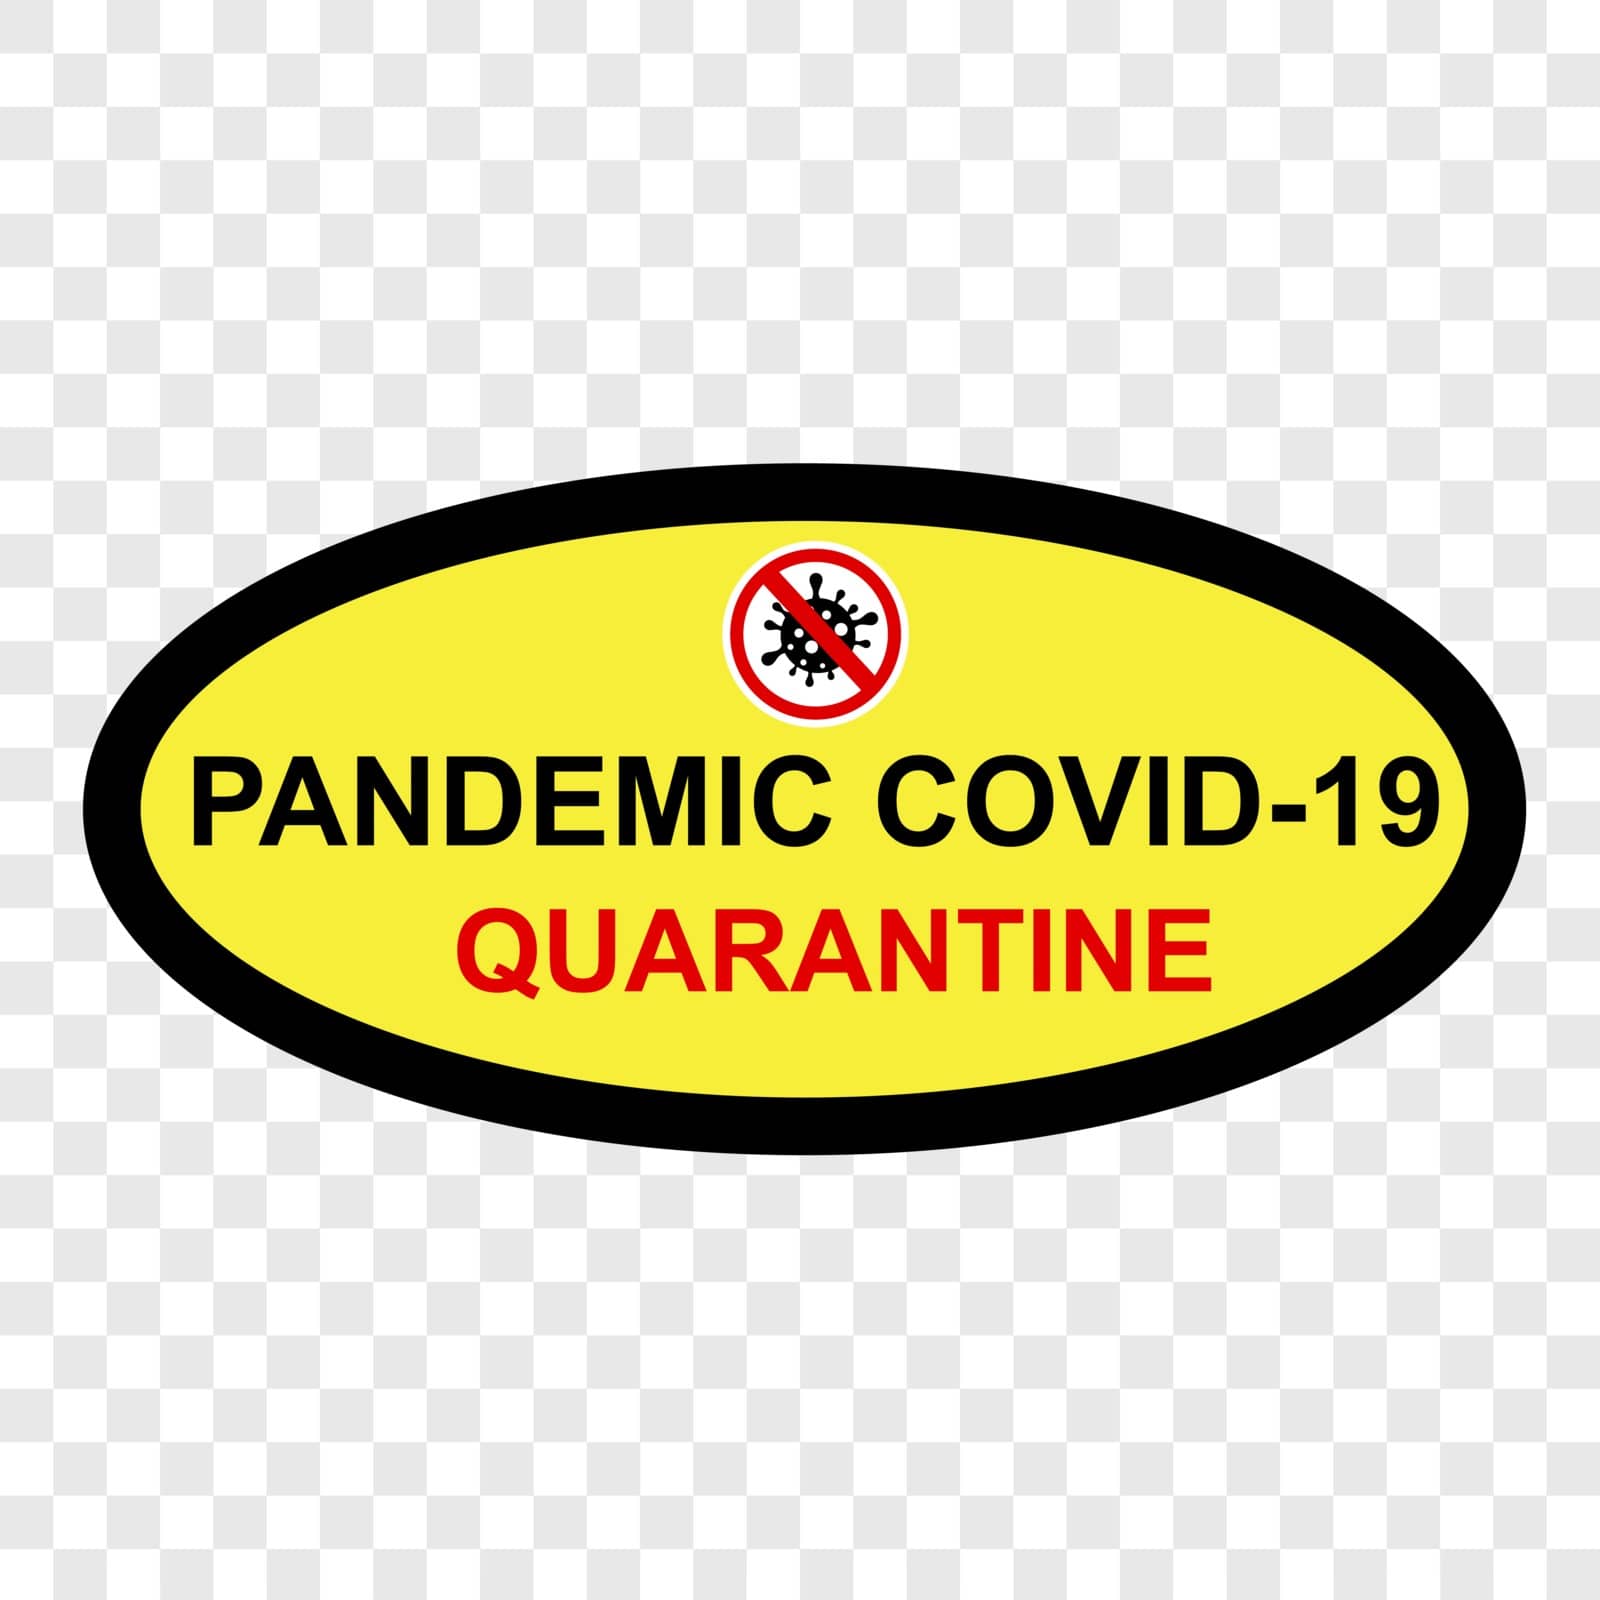 Simple Cutting Sticker, Vector Sign Caution Warning, Quarantine Outbreak Alert from Covid-19, at transparent effect